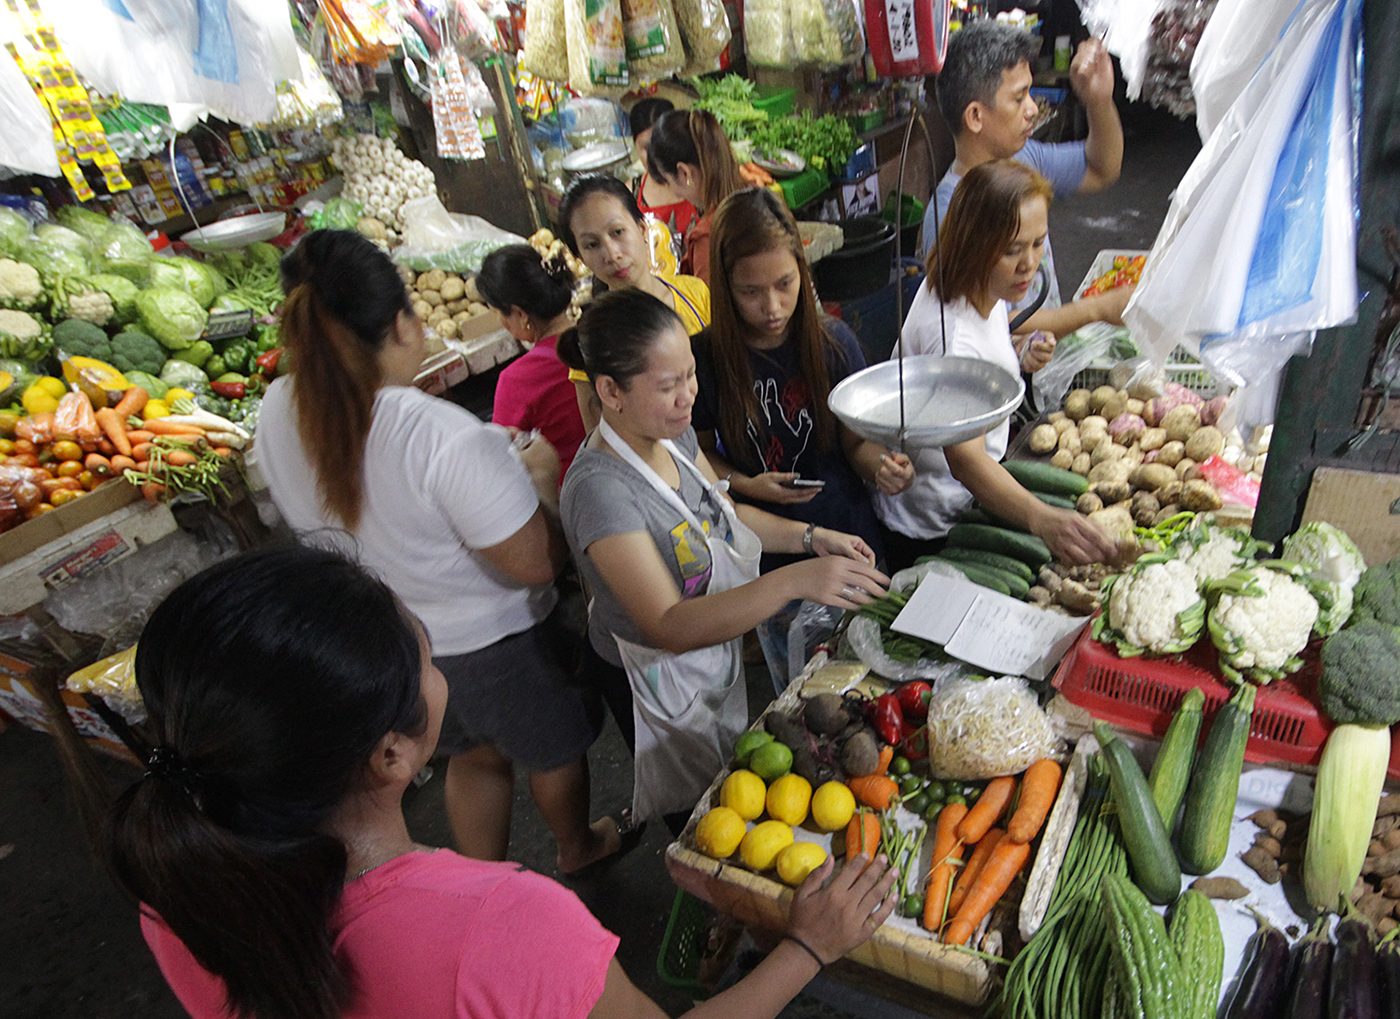 Inflation continues downtrend at 1.7% in August 2019